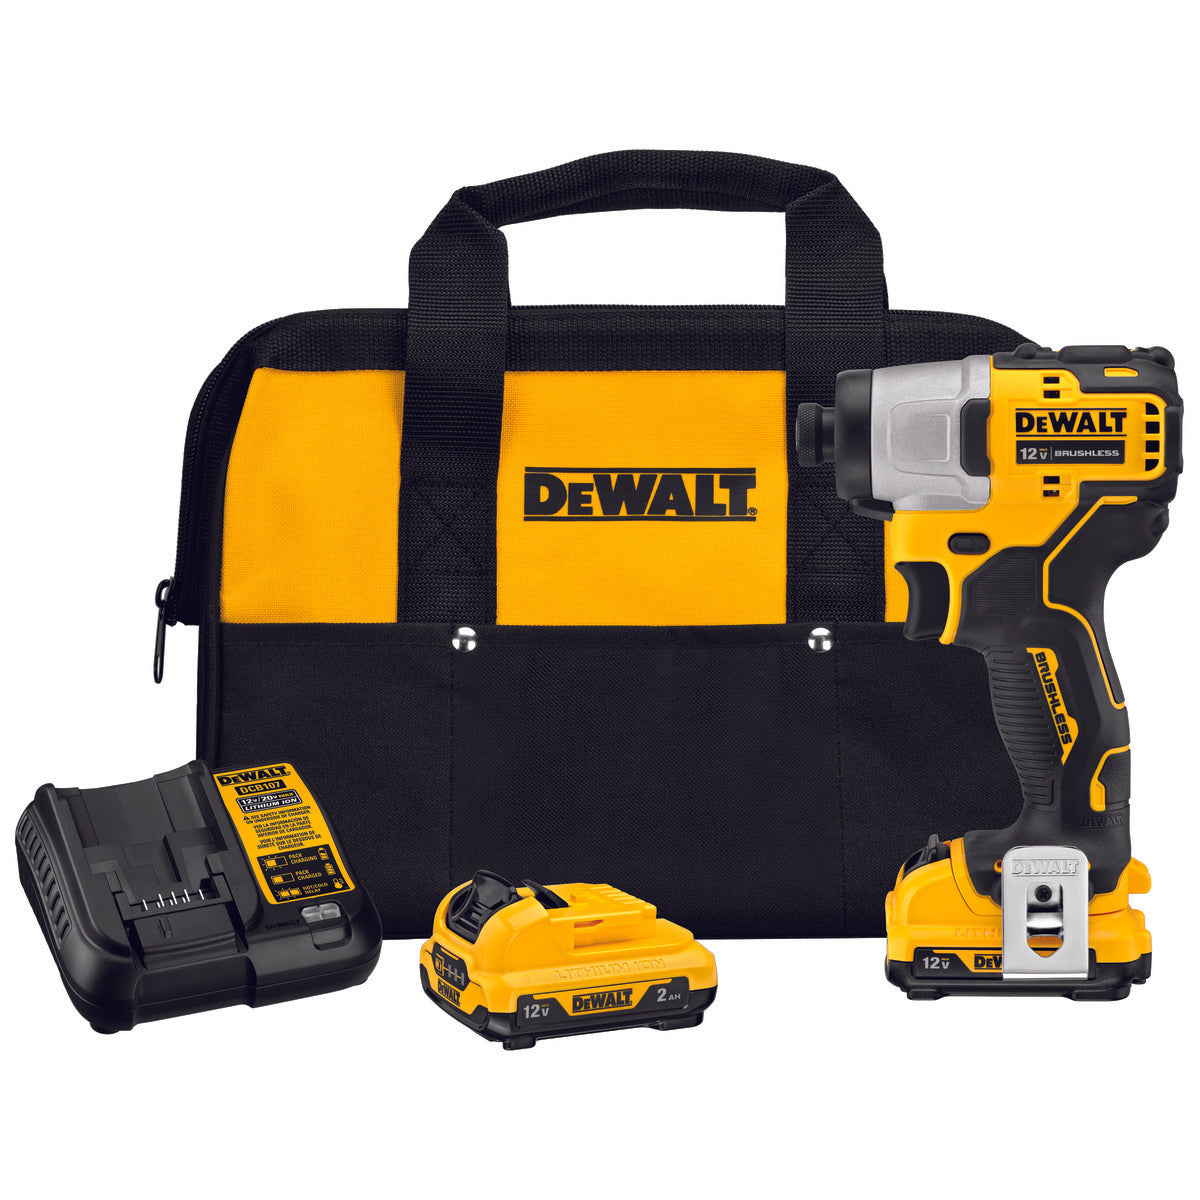 DEWALT DCF801F2 - XTREME™ 12V MAX* BRUSHLESS 1/4 IN. CORDLESS IMPACT DRIVER KIT - wise-line-tools